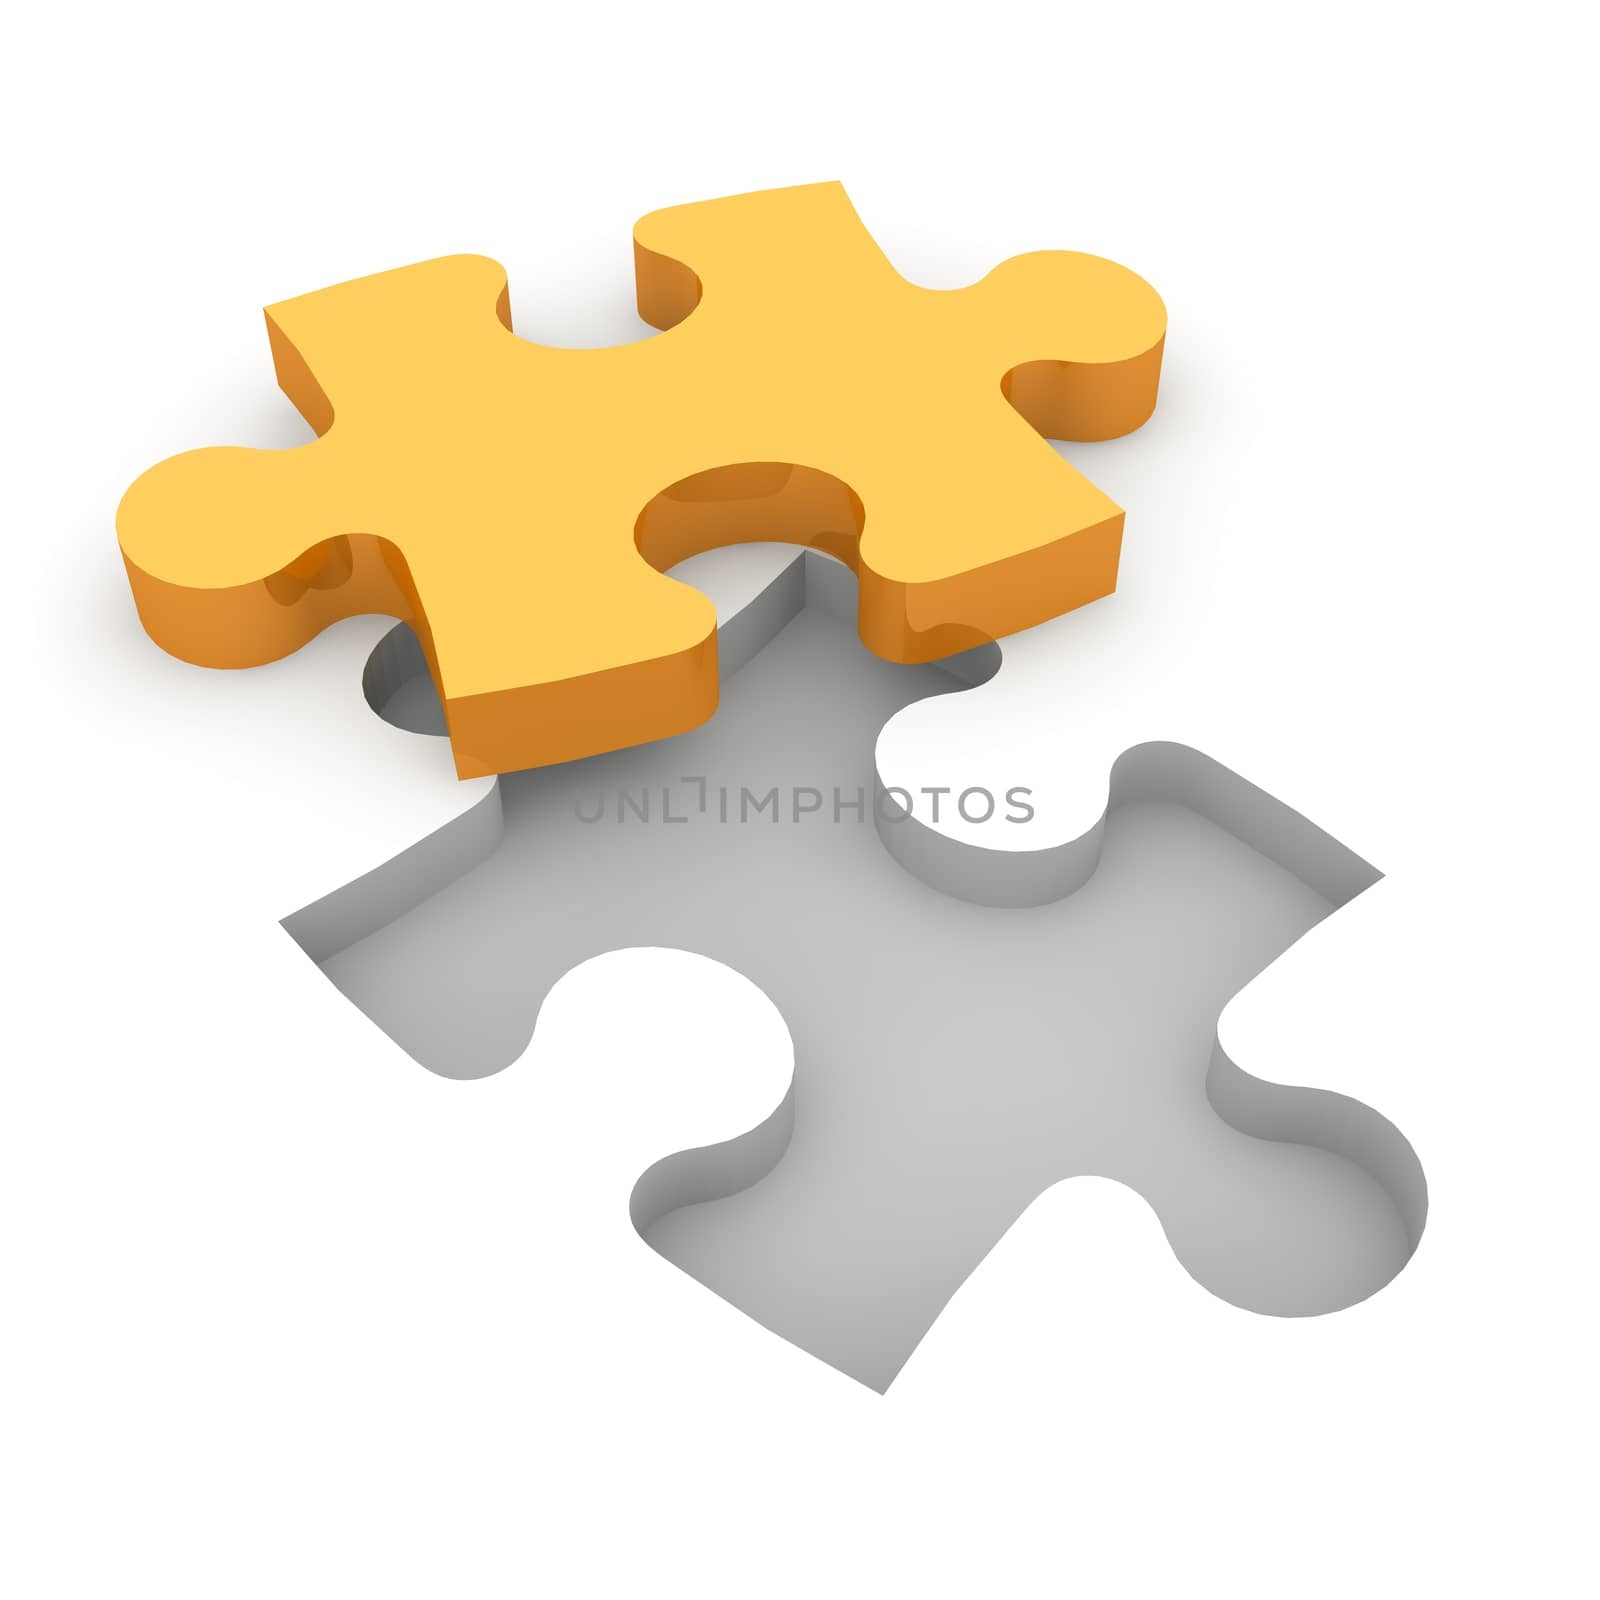 The characters carry a puzzle piece to the appropriate gap.